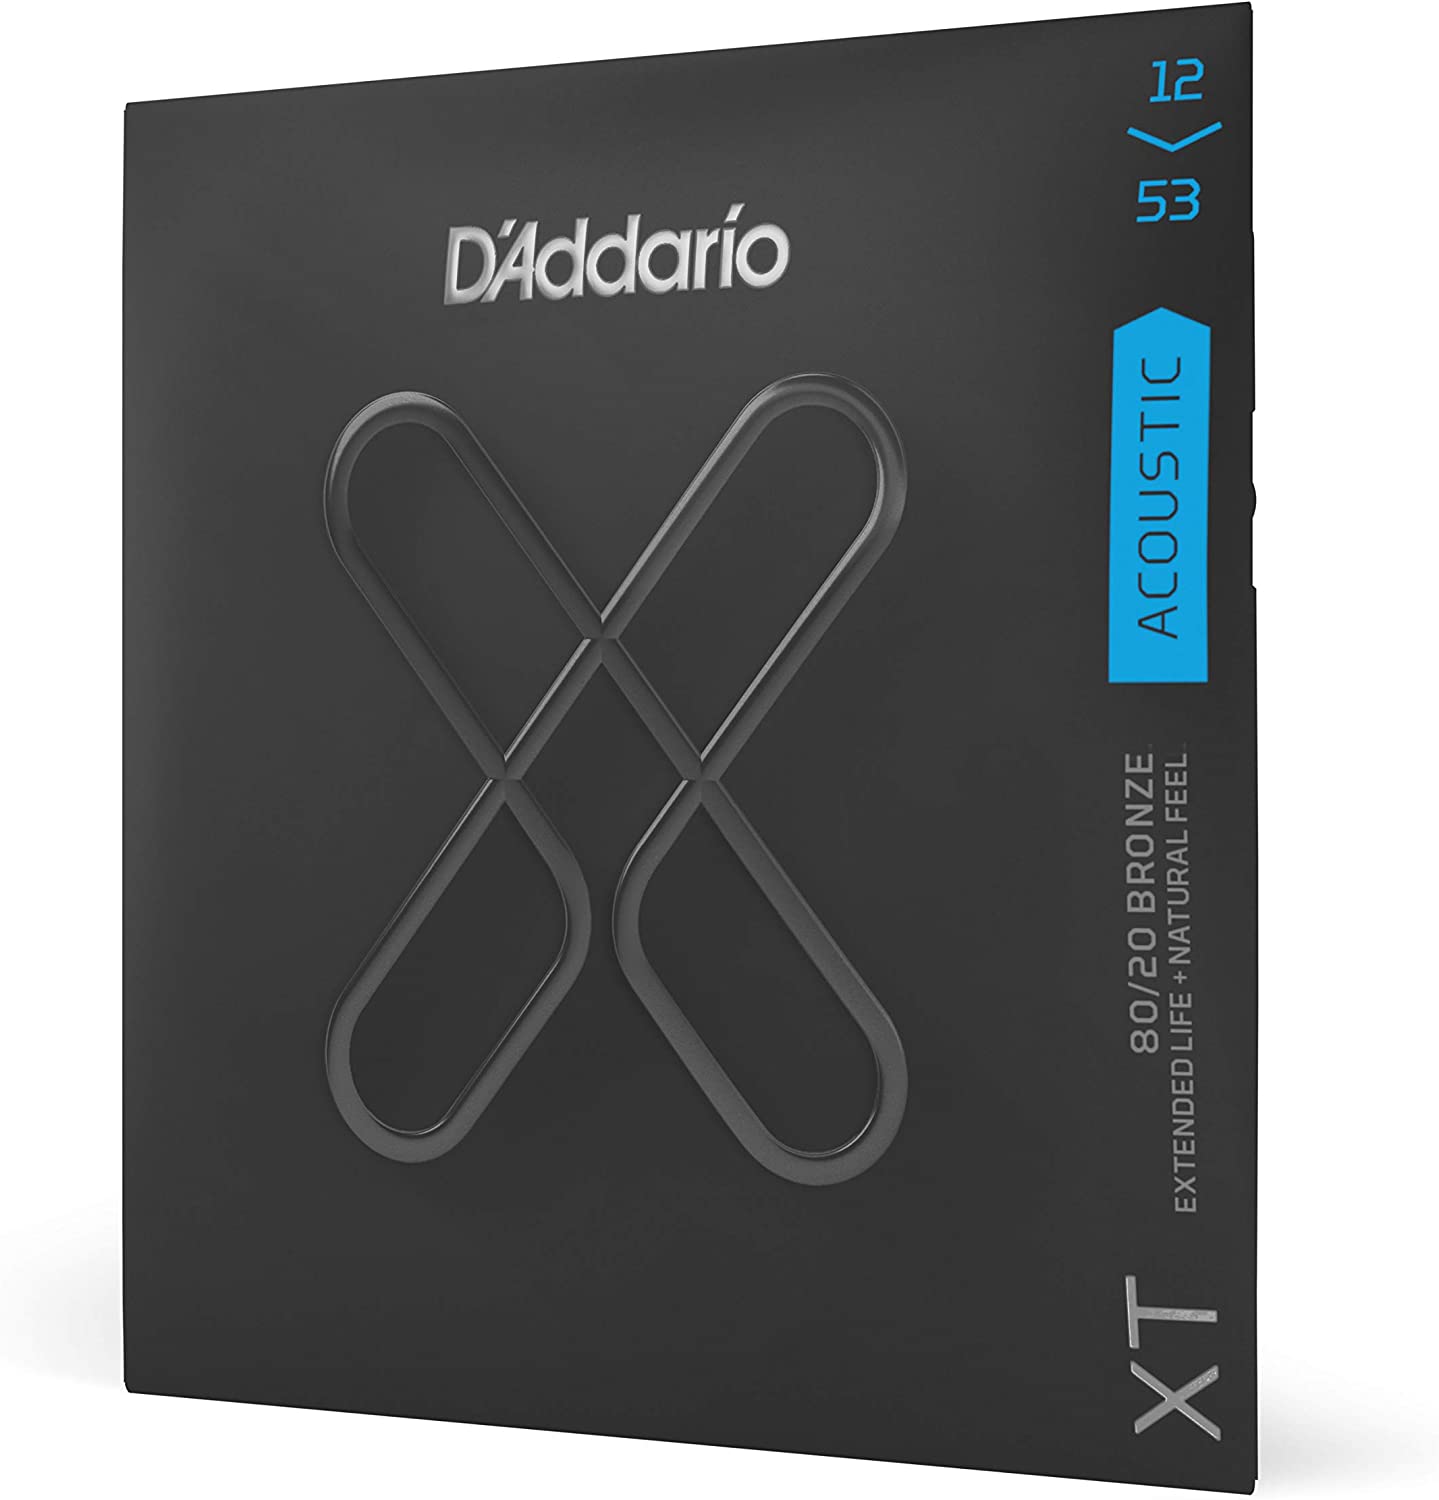 D'Addario XT 80/20 Bronze Coated Guitar Strings on a white background